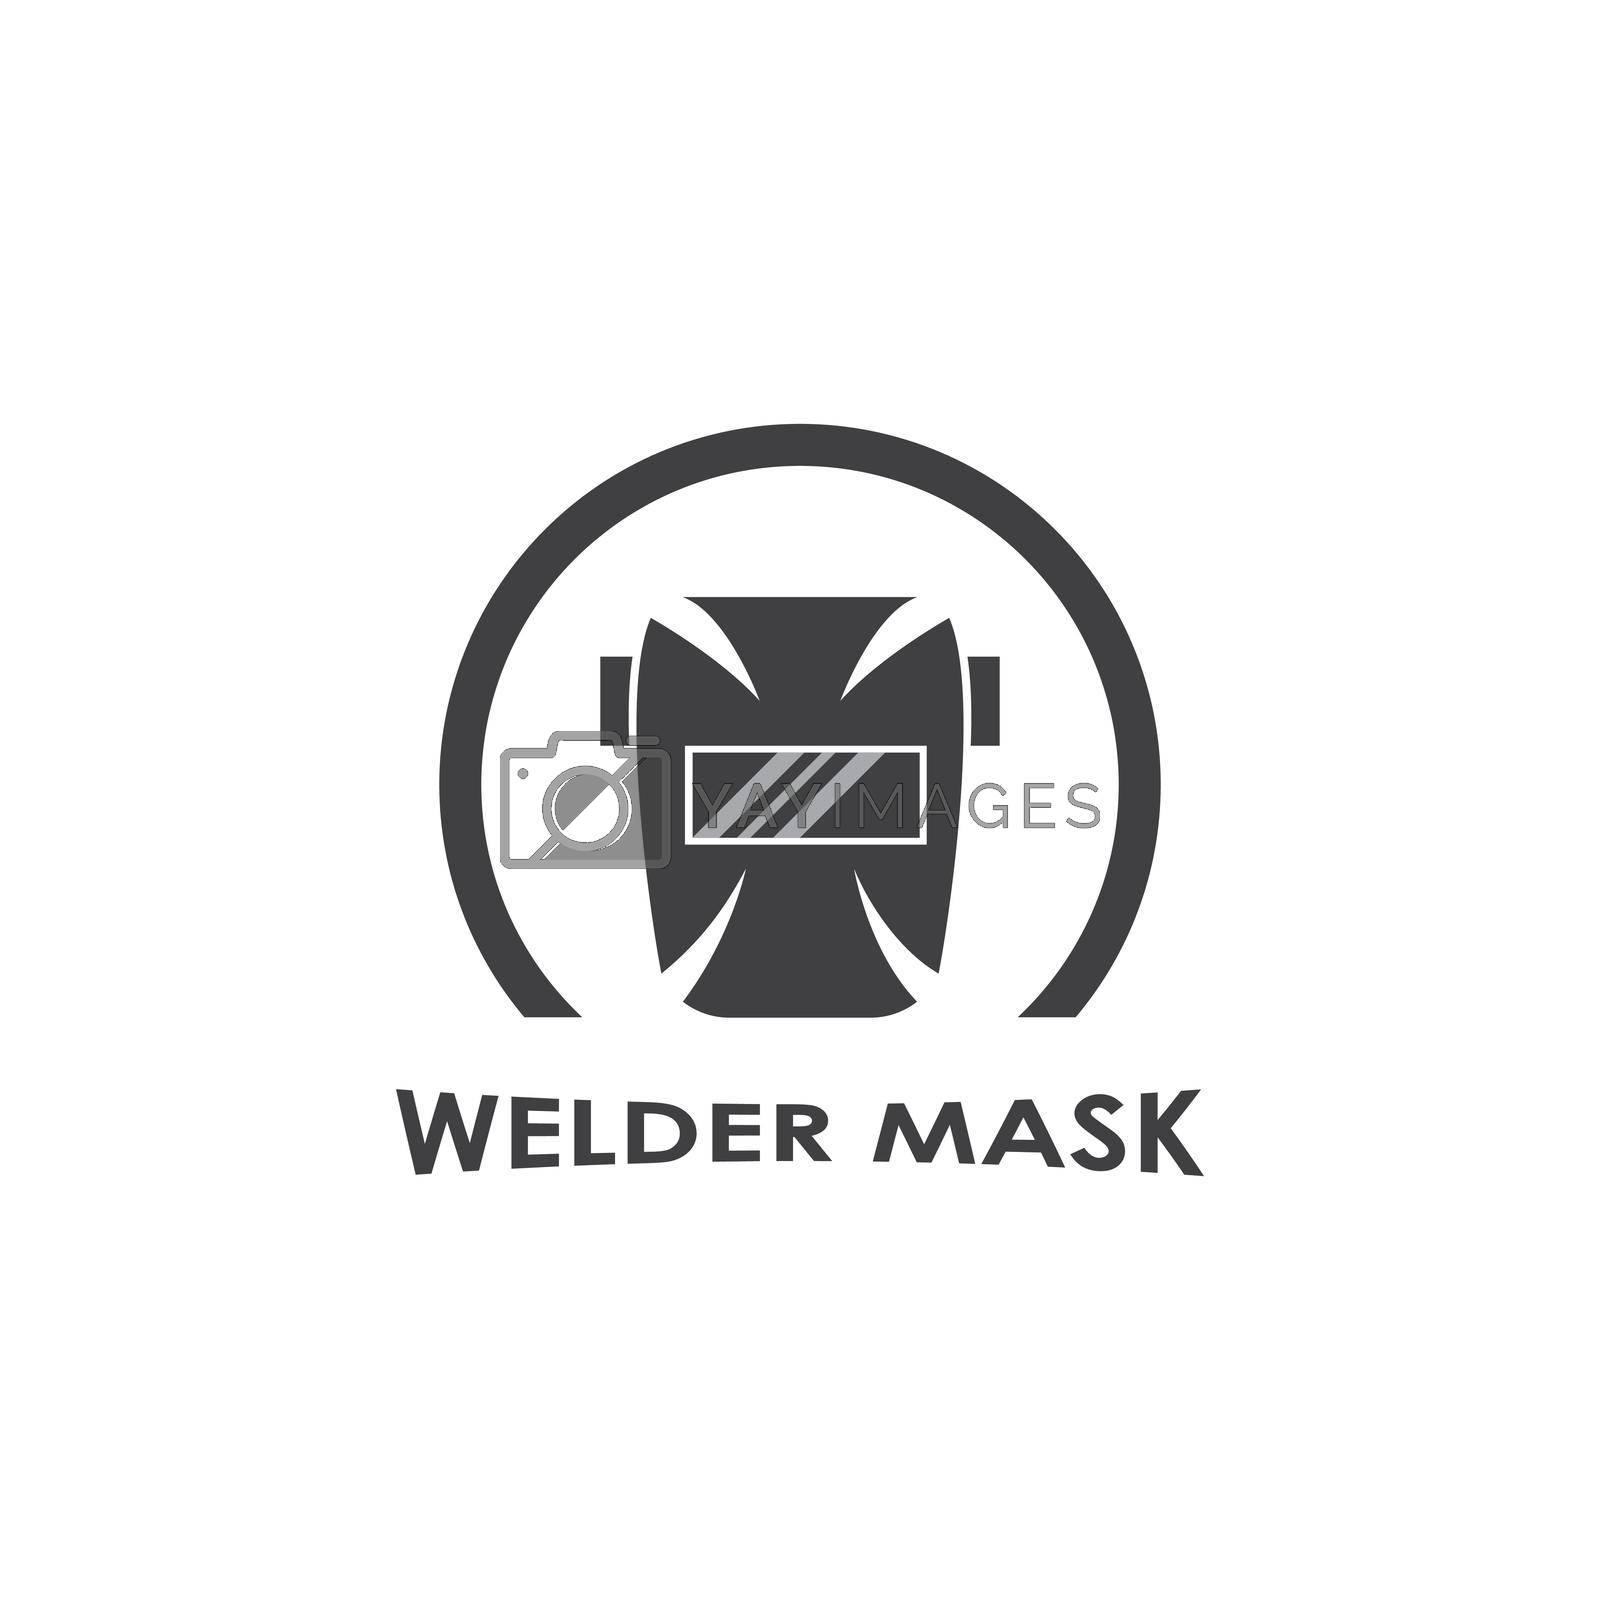 Royalty free image of Welding logo design by awk